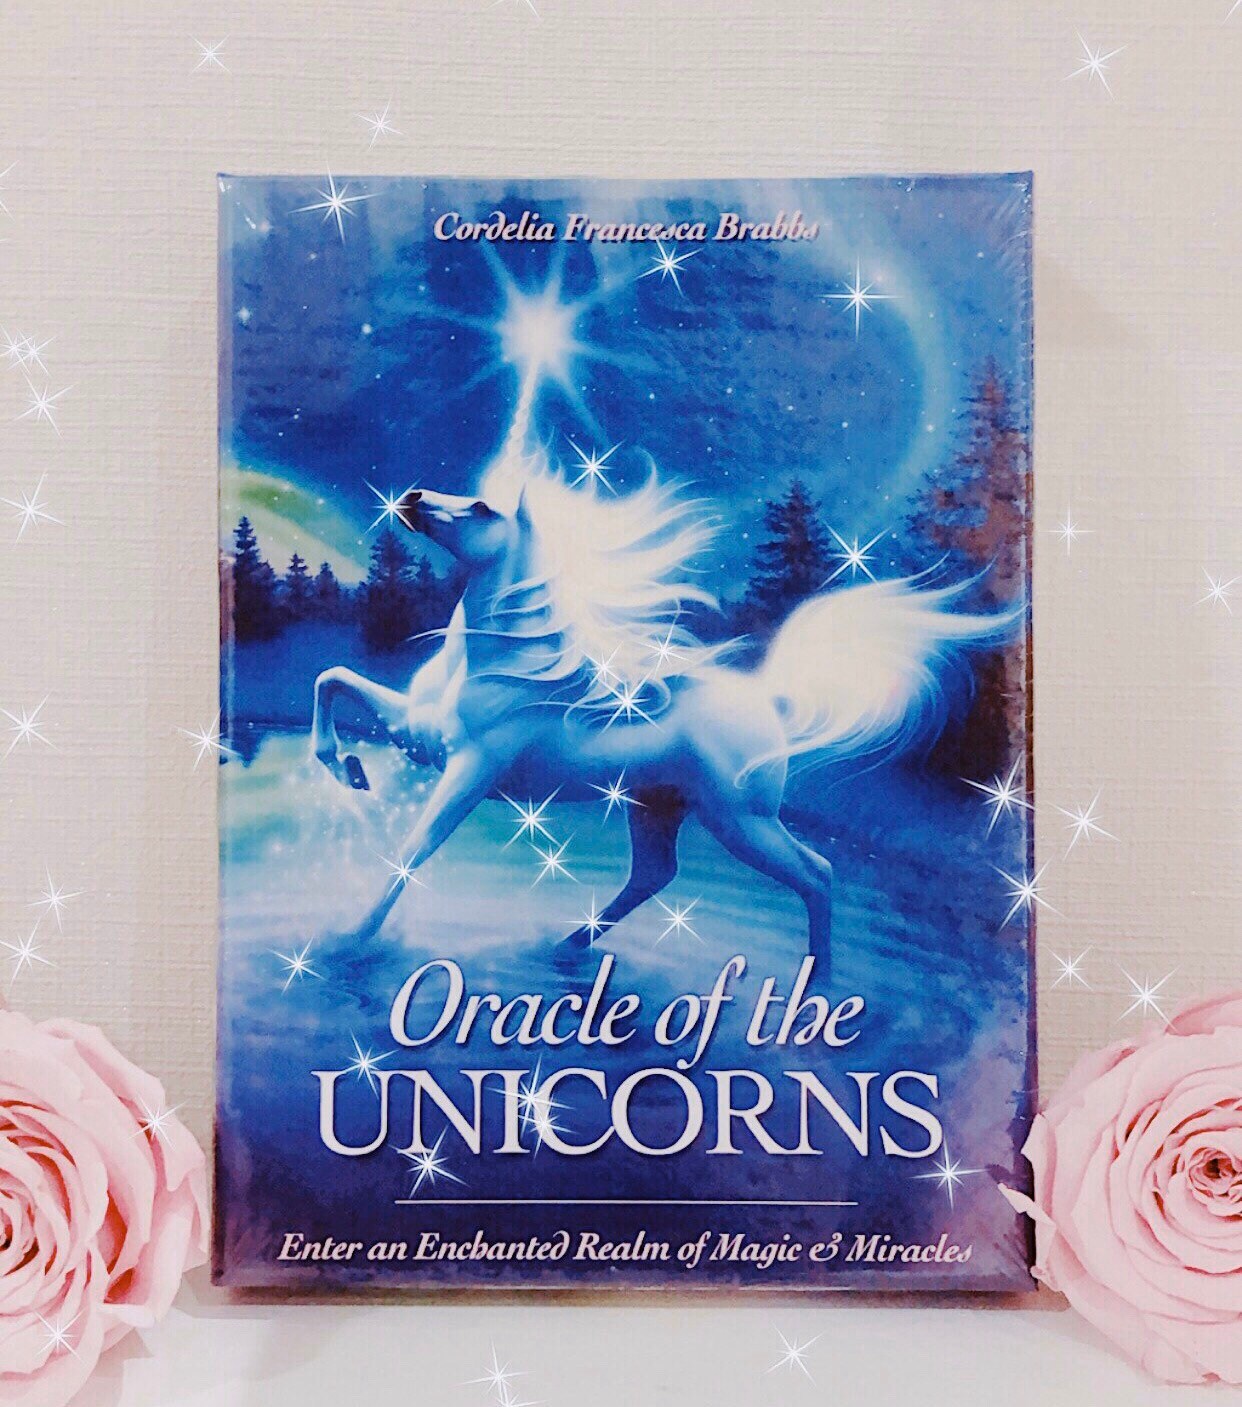 Oracle of the Unicorns Deck by Cordelia F. Brabbs | Etsy